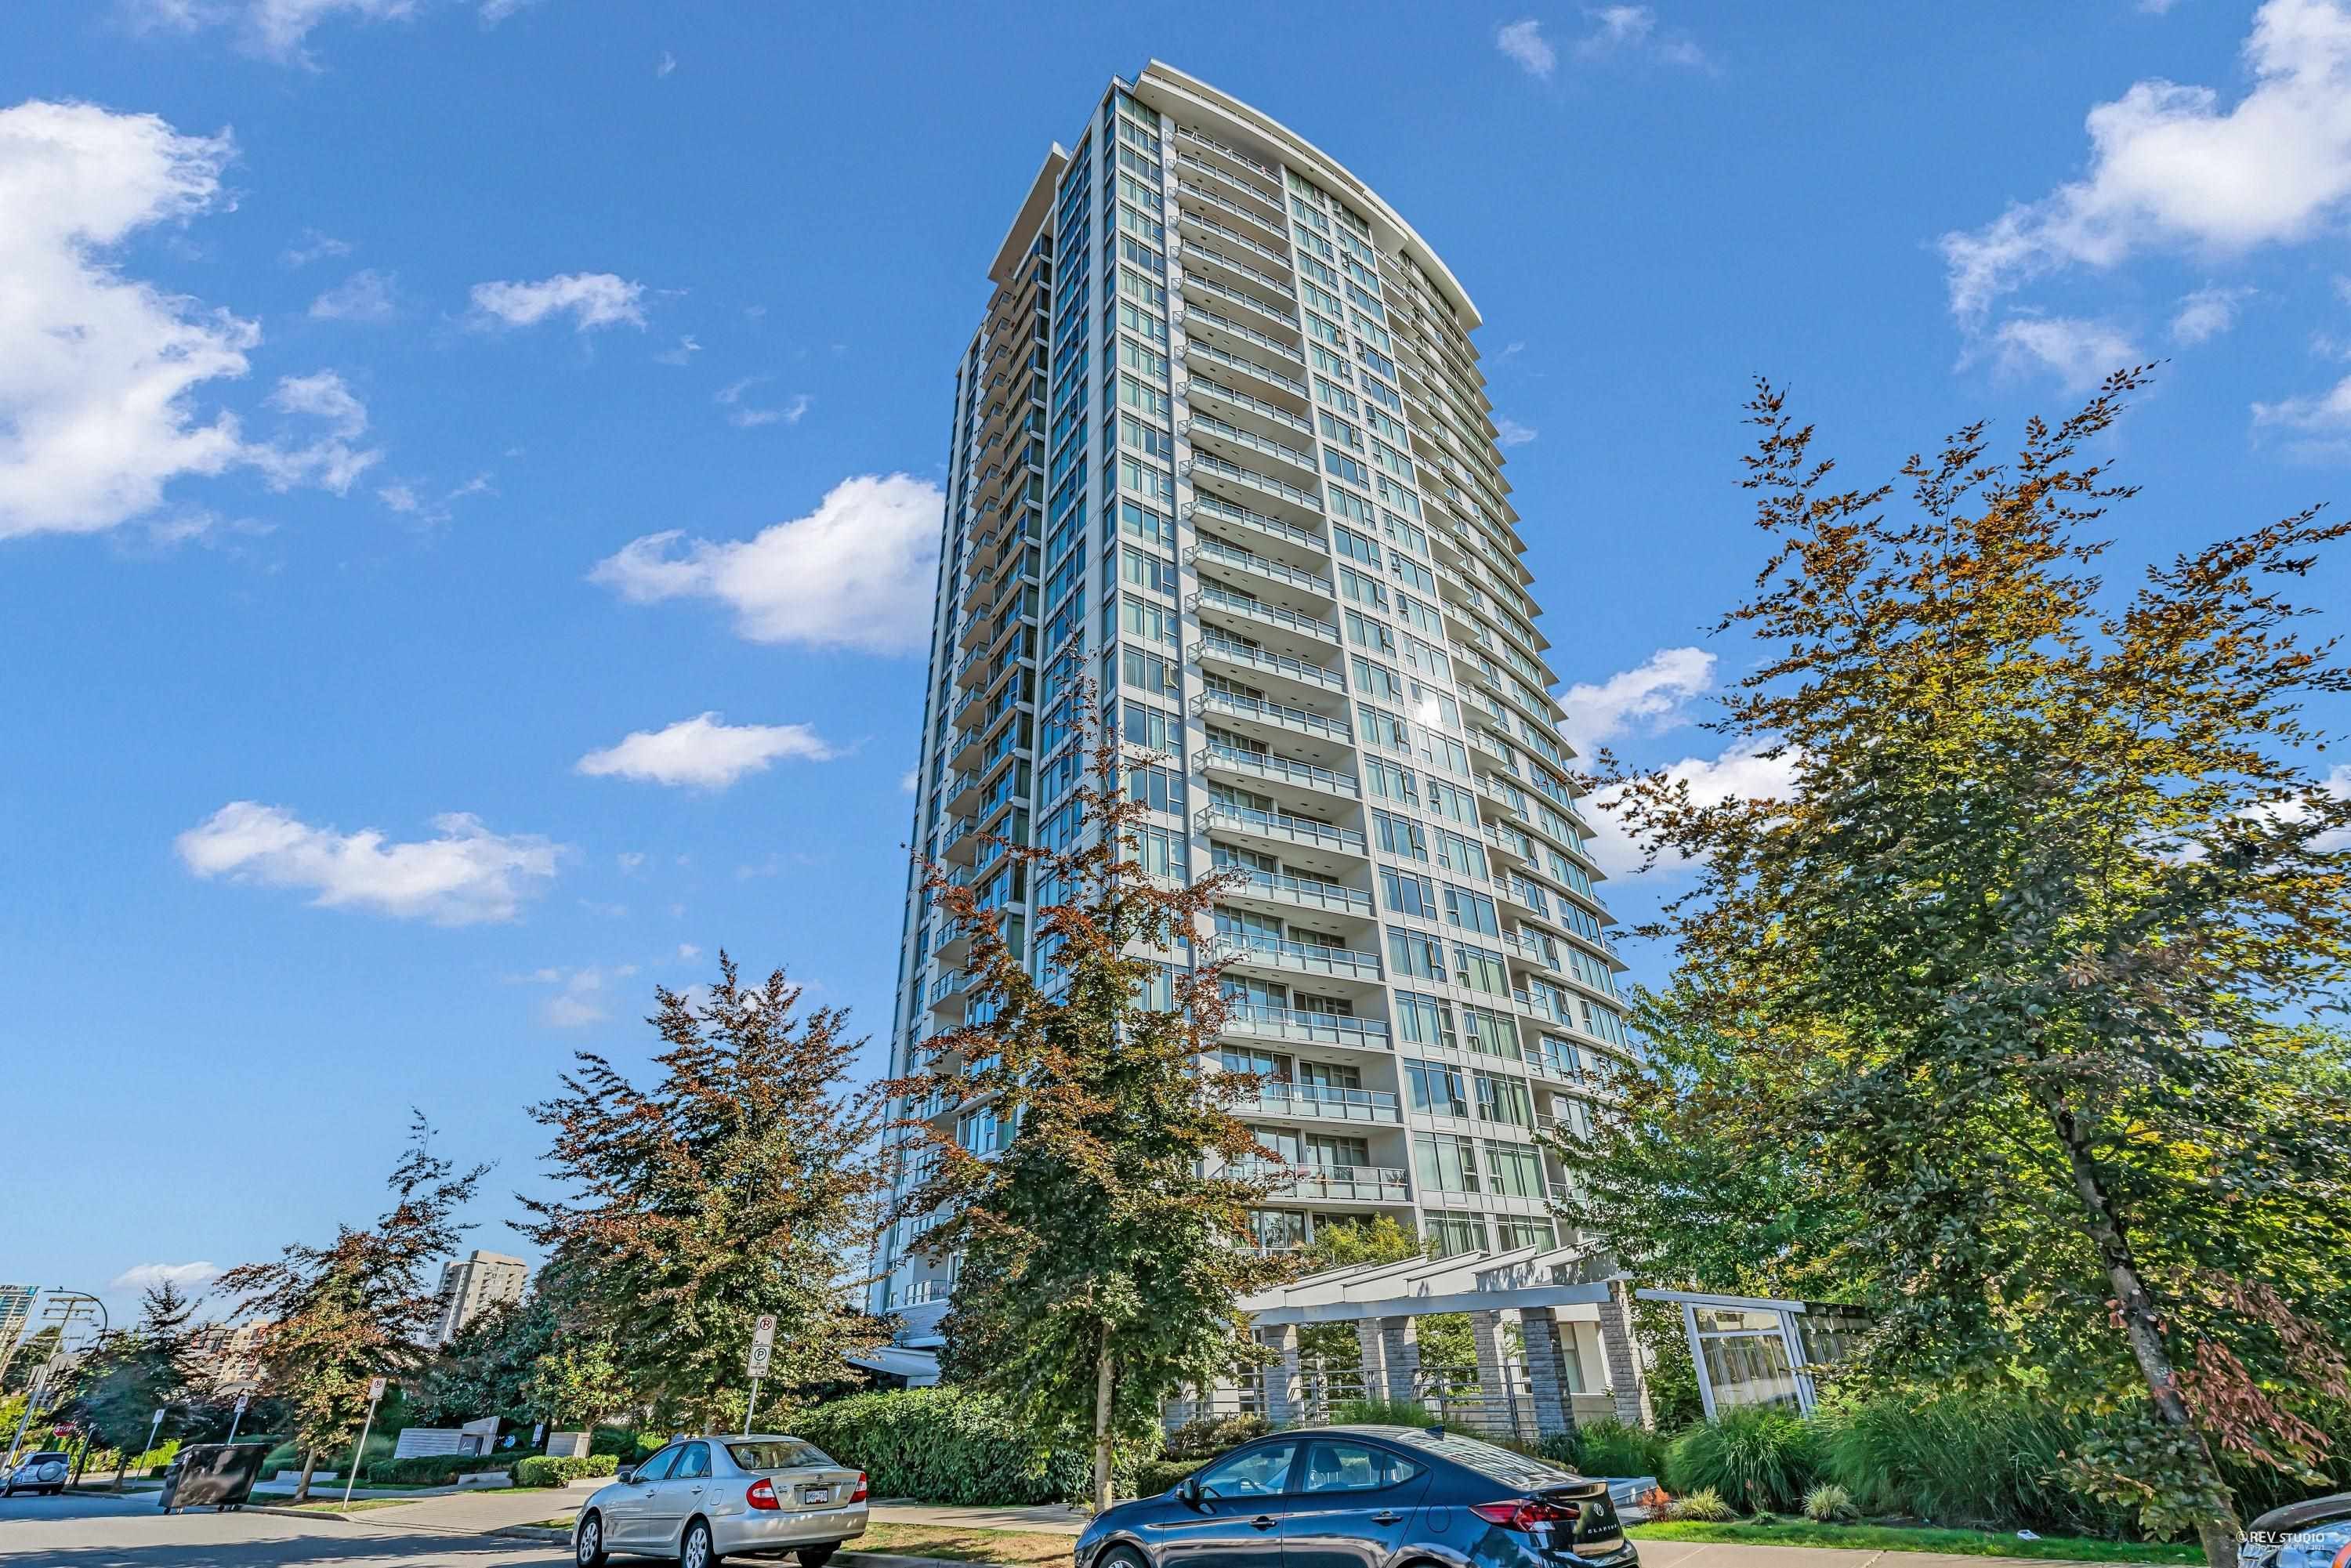 Main Photo: 2902 6688 ARCOLA Street in Burnaby: Highgate Condo for sale (Burnaby South)  : MLS®# R2874016